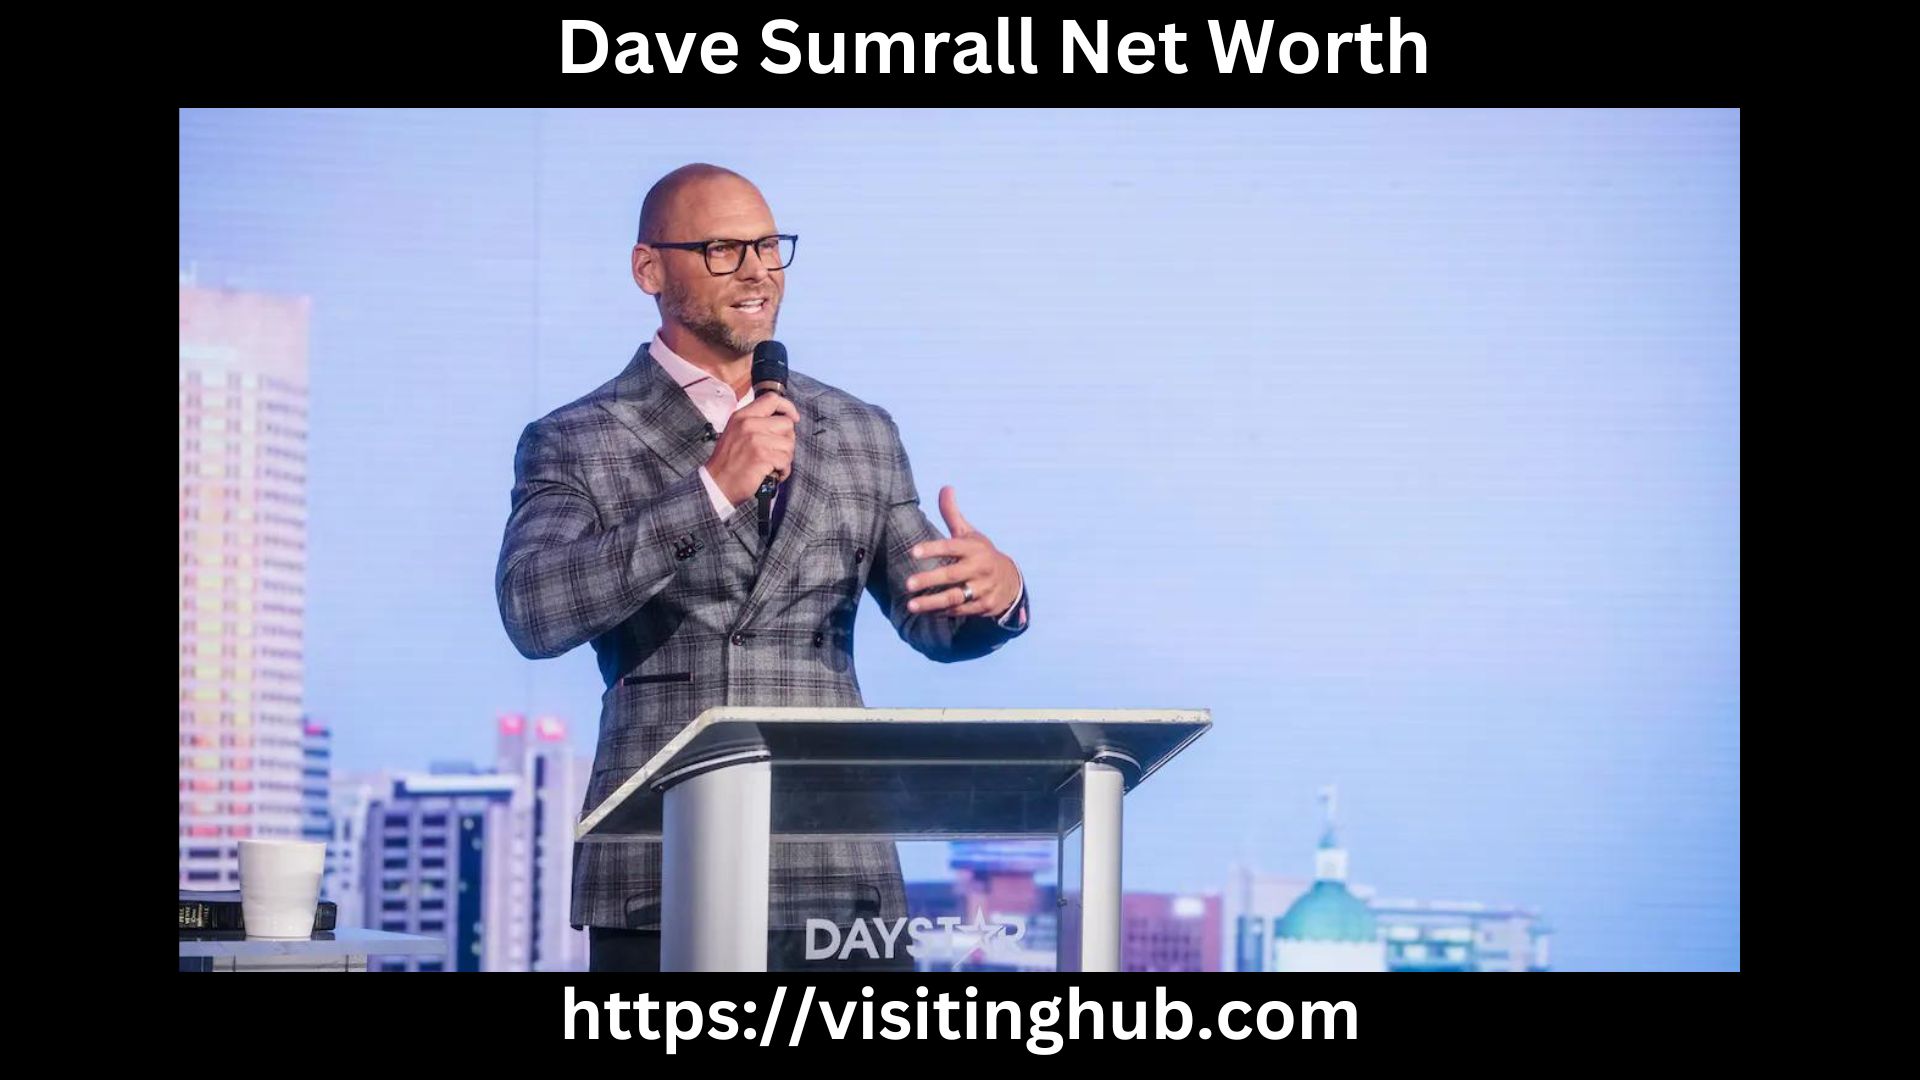 Dave Sumrall Net Worth